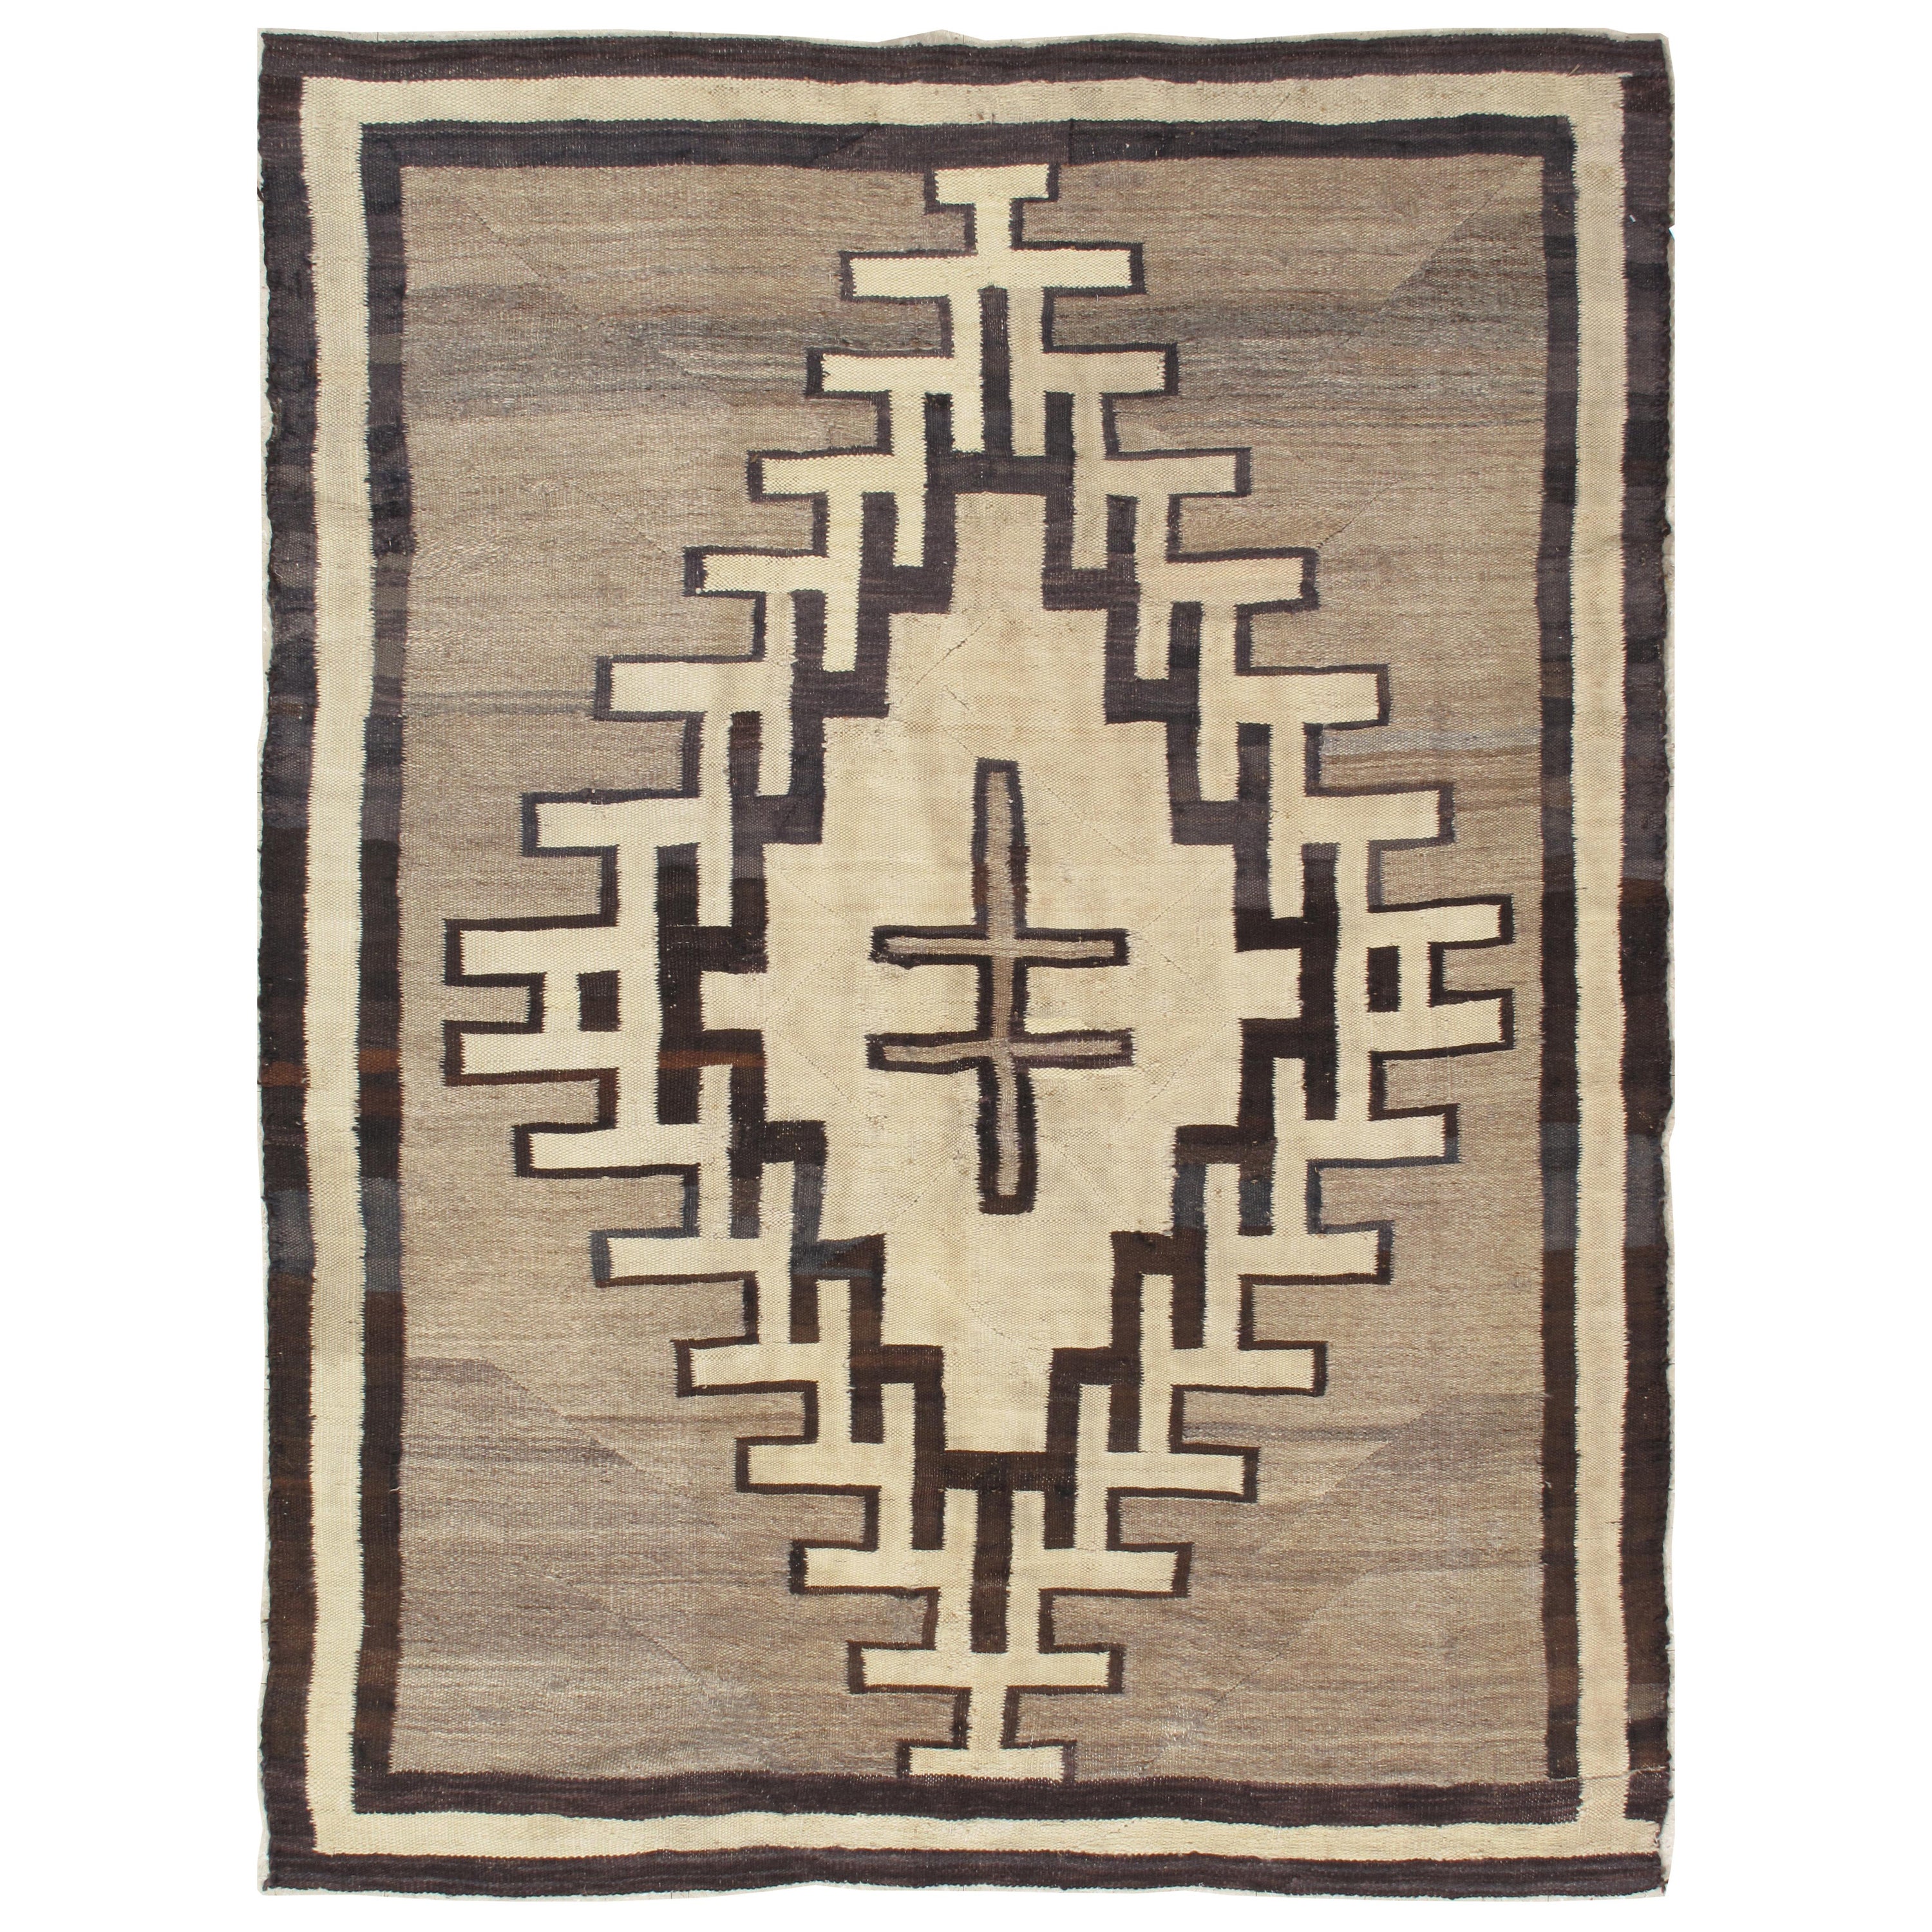 Antique Navajo Carpet, Handmade Wool, Neutral colors, Ivory, Beige, Gray & Brown For Sale